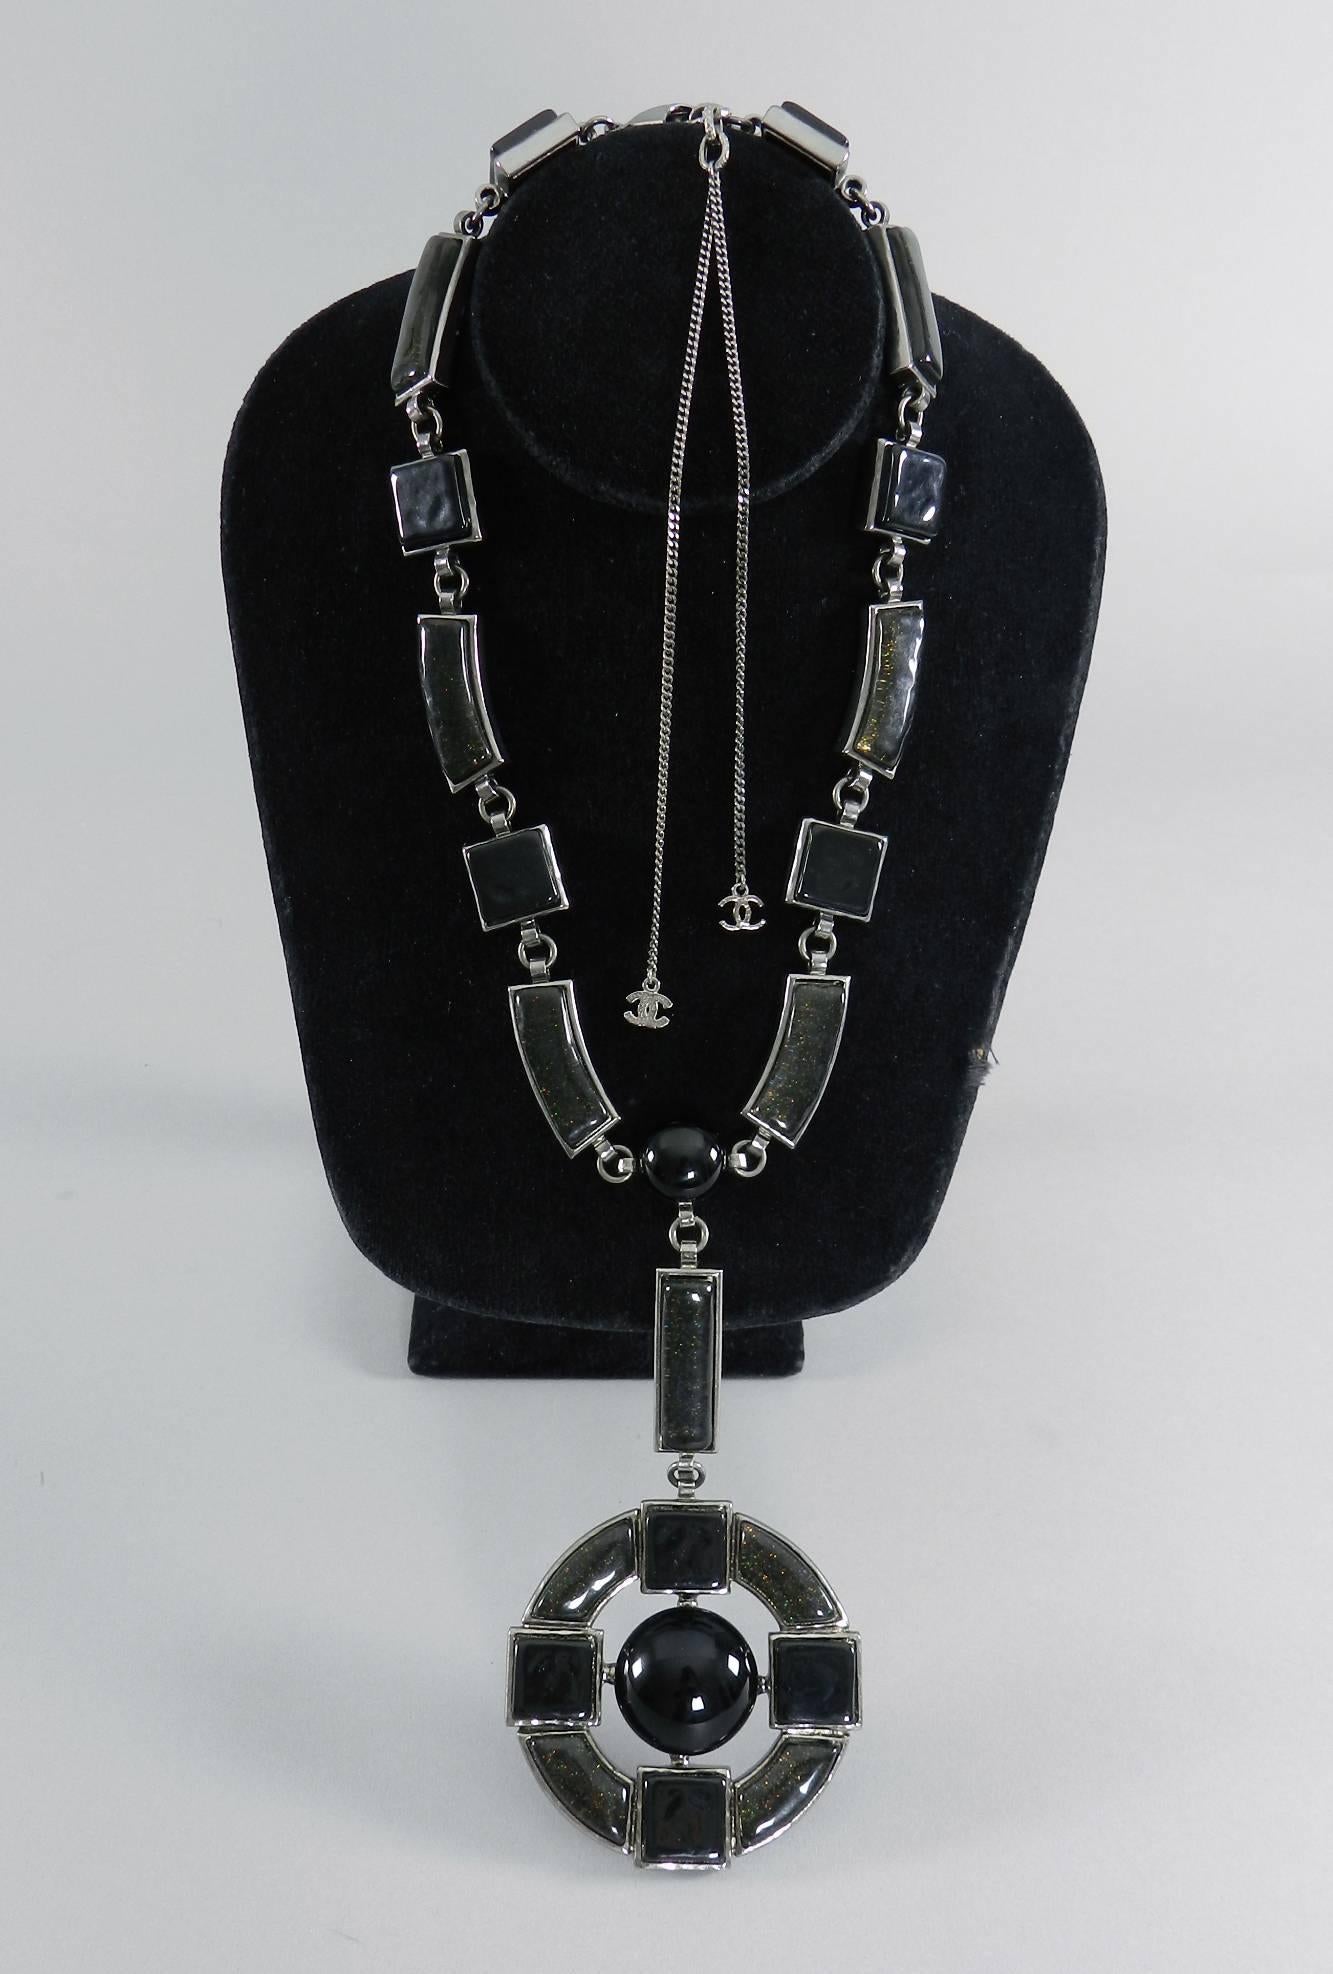 Chanel 09A 2009 Fall black gripoix glass statement necklace. Dark (almost black) grey resin with shimmer glitter and black glass decorate this dramatic cross pendant necklace. Dark silver tone ruthenium metal.  Excellent pre-owned condition - like